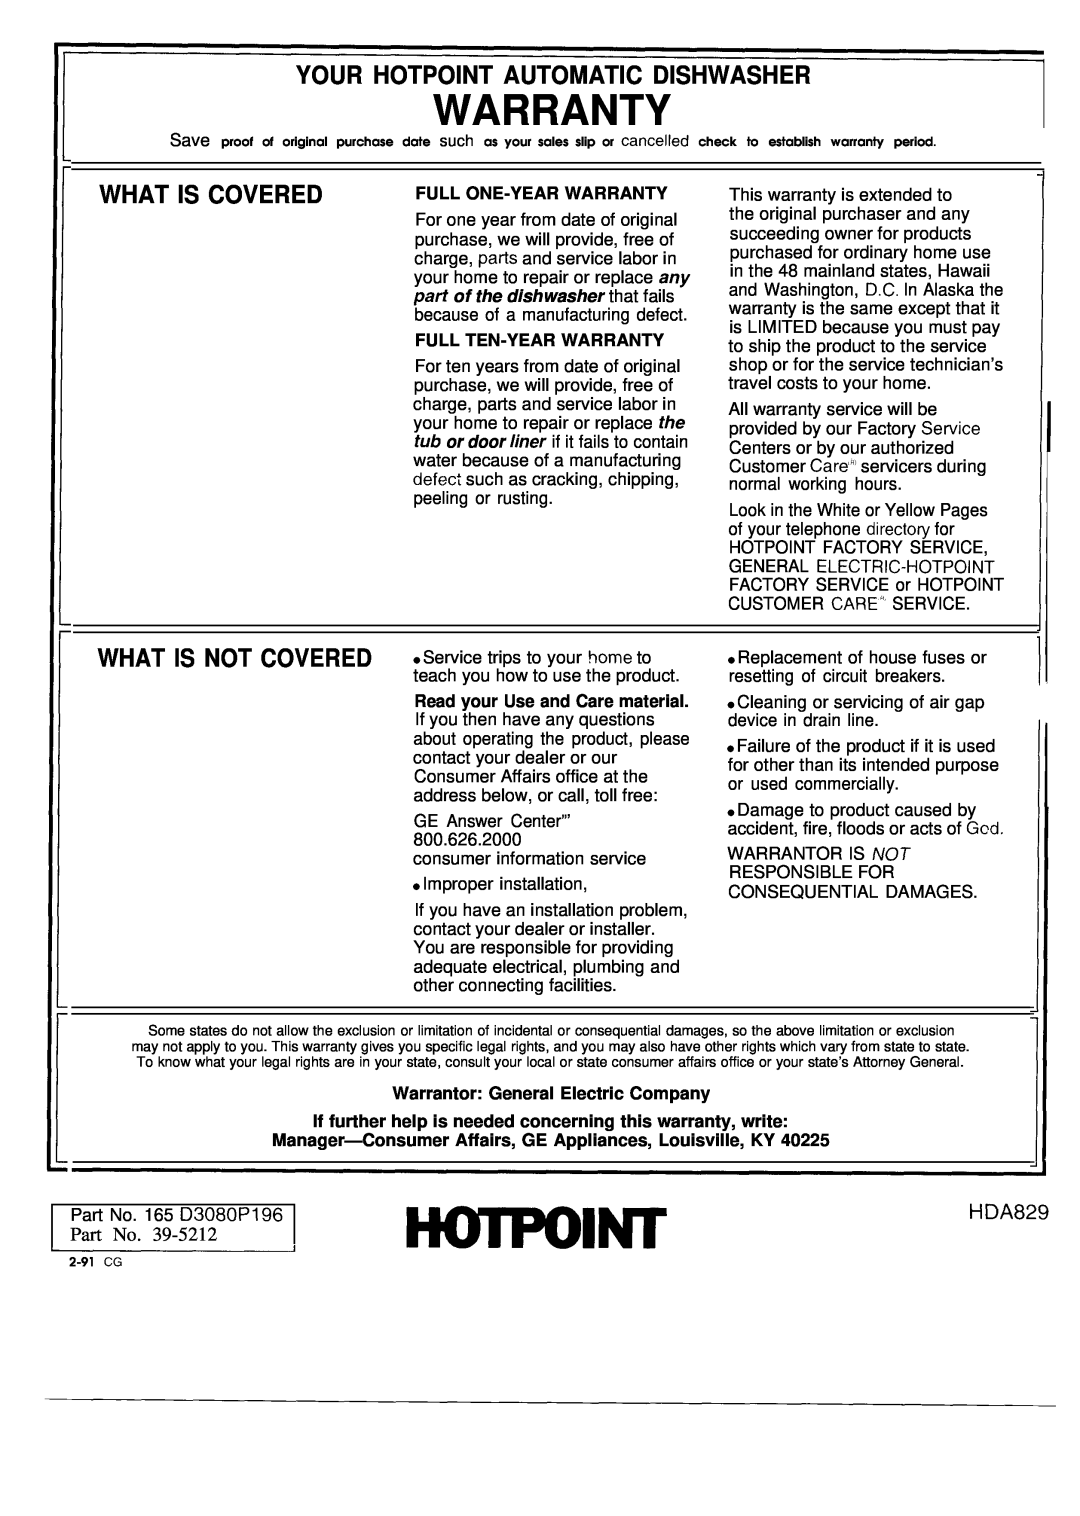 Hotpoint HDA829 Warranty, Your Hotpoint Automatic Dishwasher, What Is Covered, Full One-Yearwarranty 